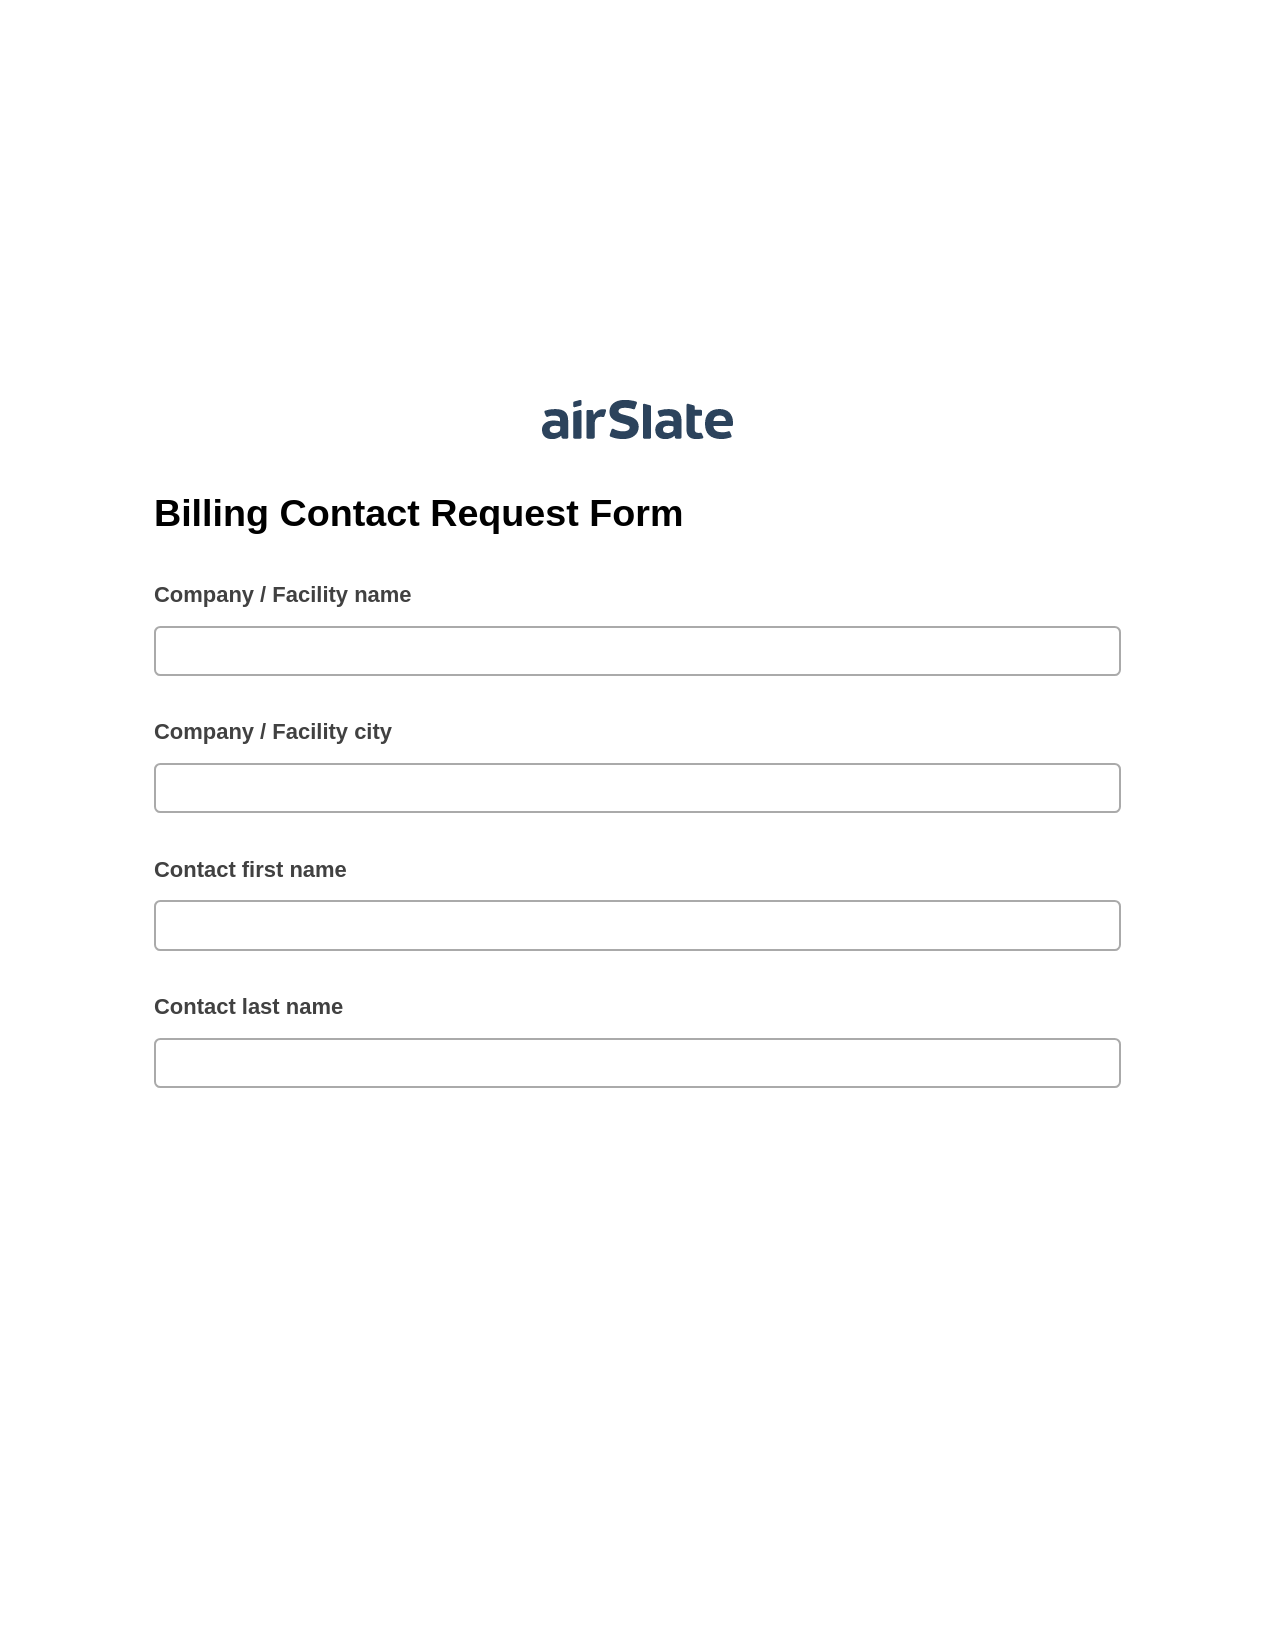 Multirole Billing Contact Request Form Pre-fill from Salesforce Record Bot, Hide Signatures Bot, Google Drive Bot